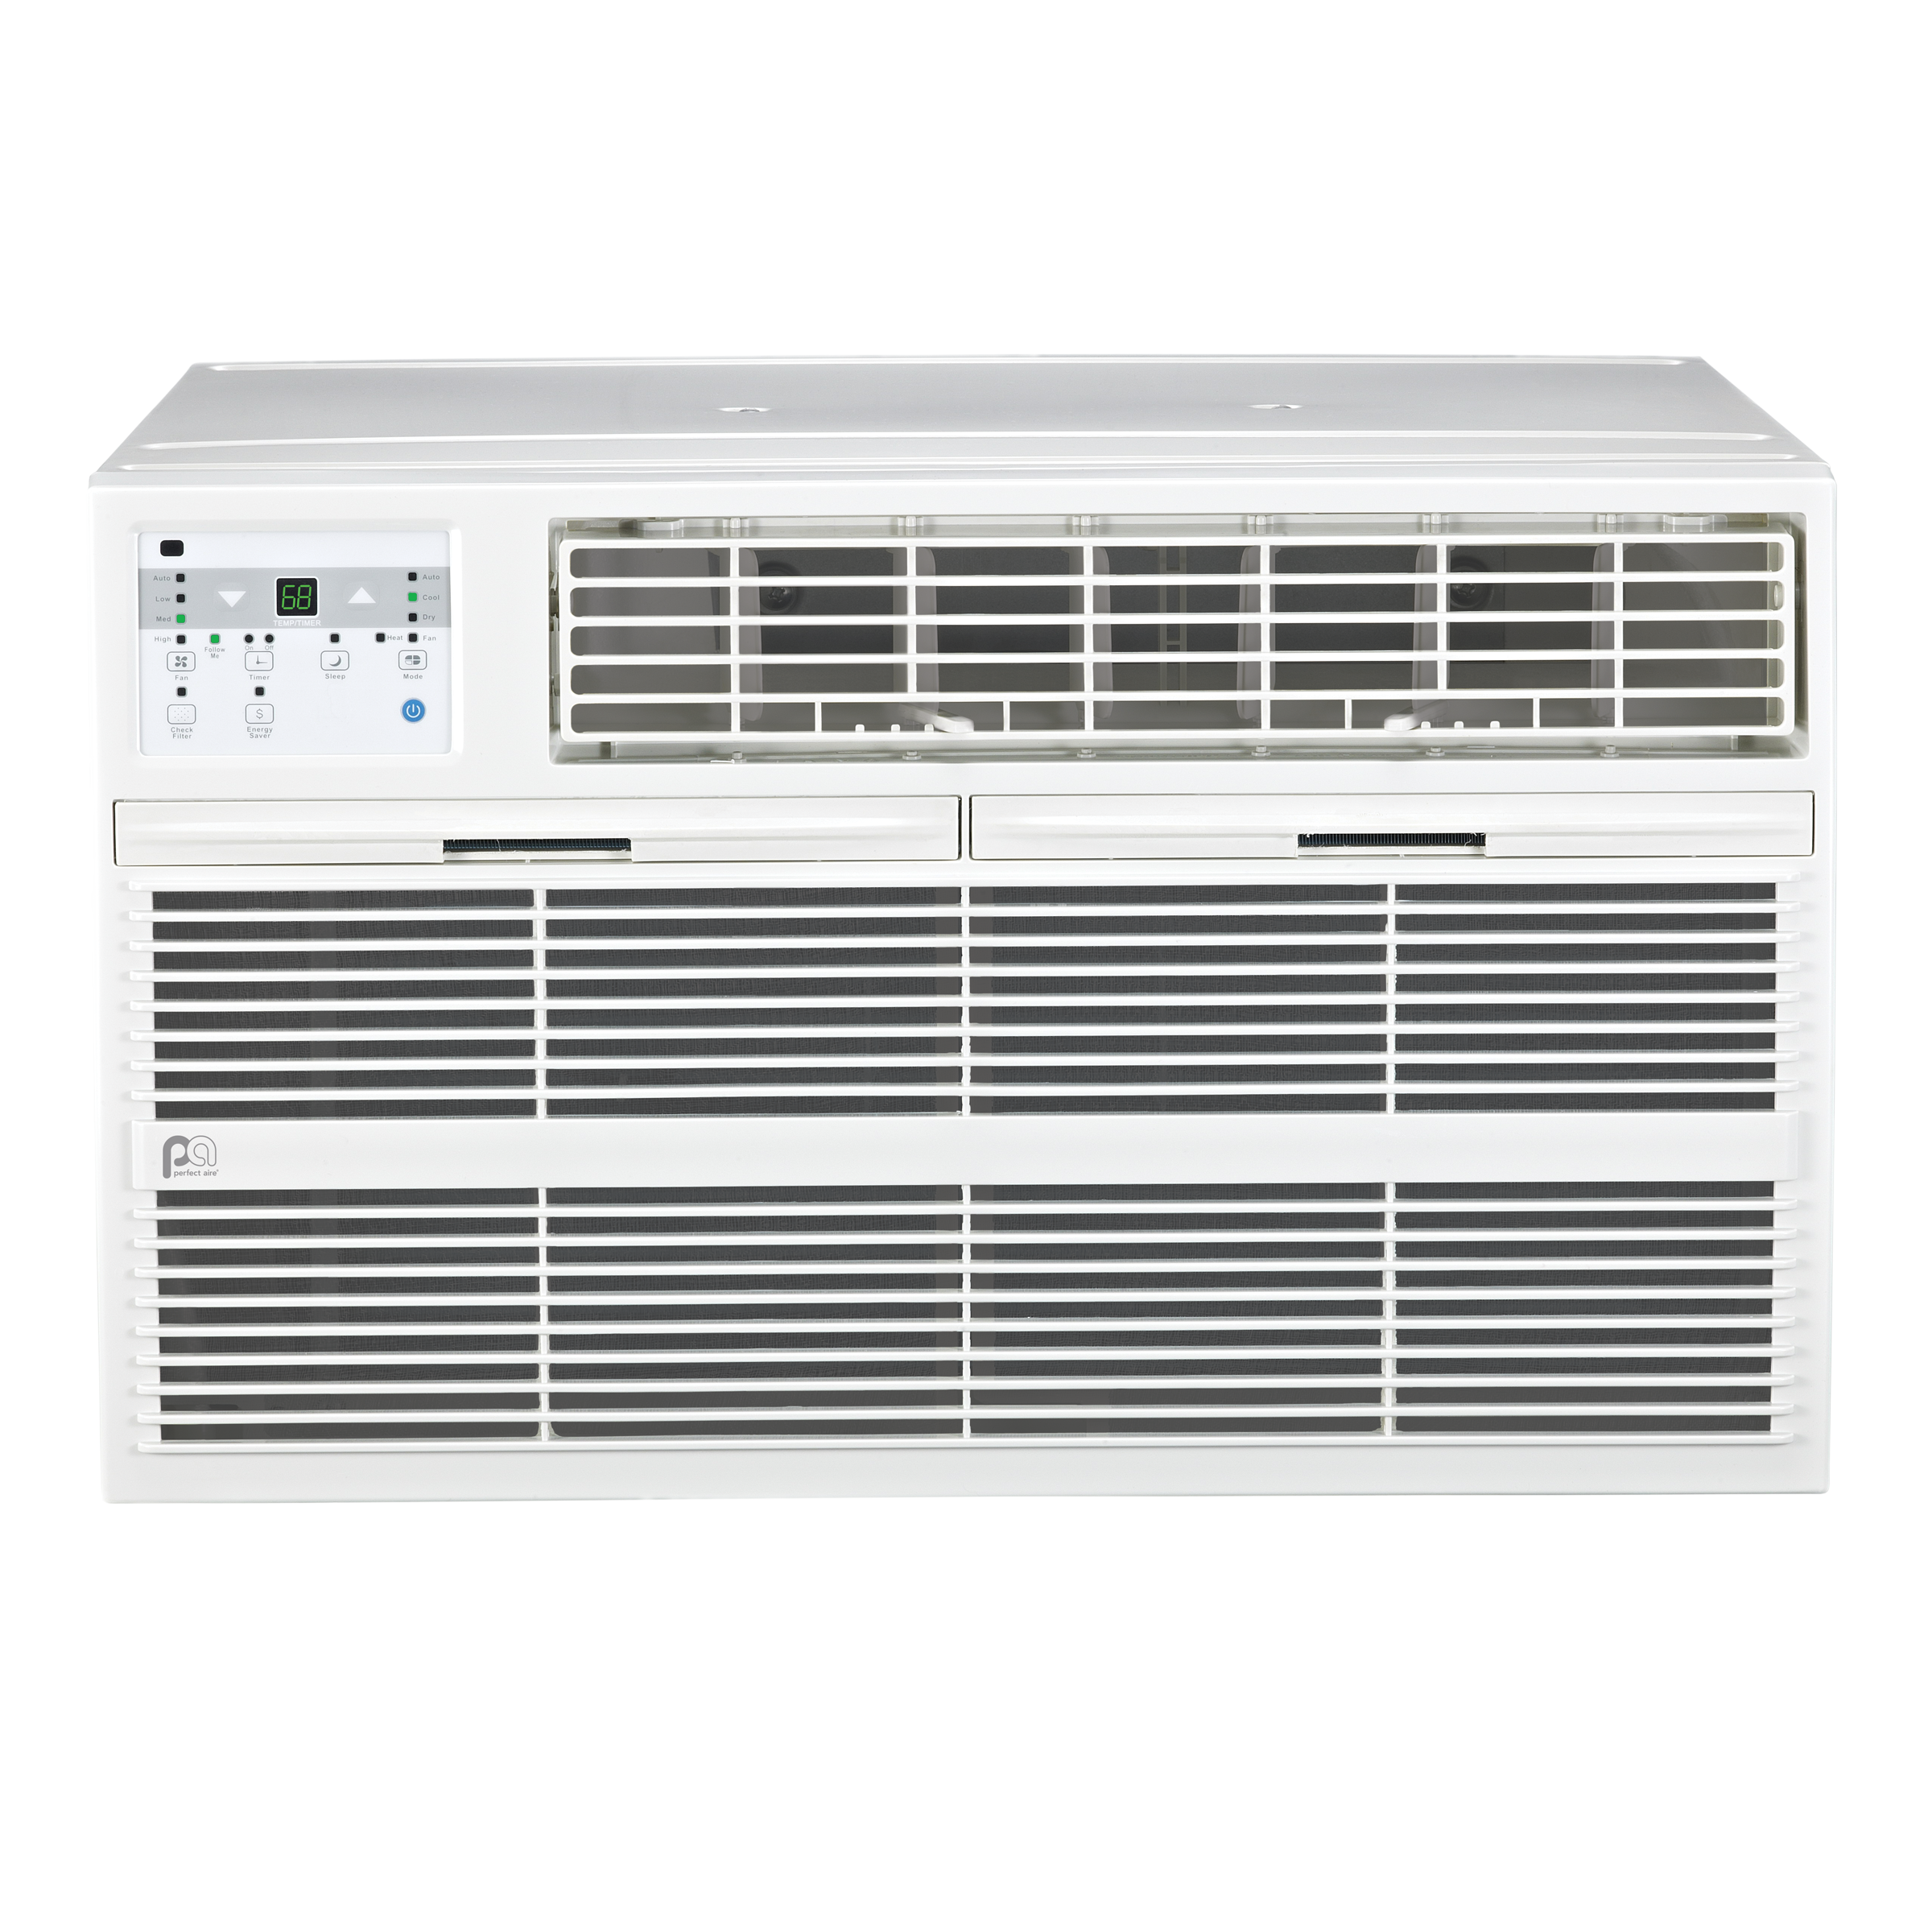 3PATWH12002 Perfect Aire 12,000 BTU Thru-the-Wall Air Conditioner with Electric Heater, Sq. ft: 450-550 Coverage, With Remote Control